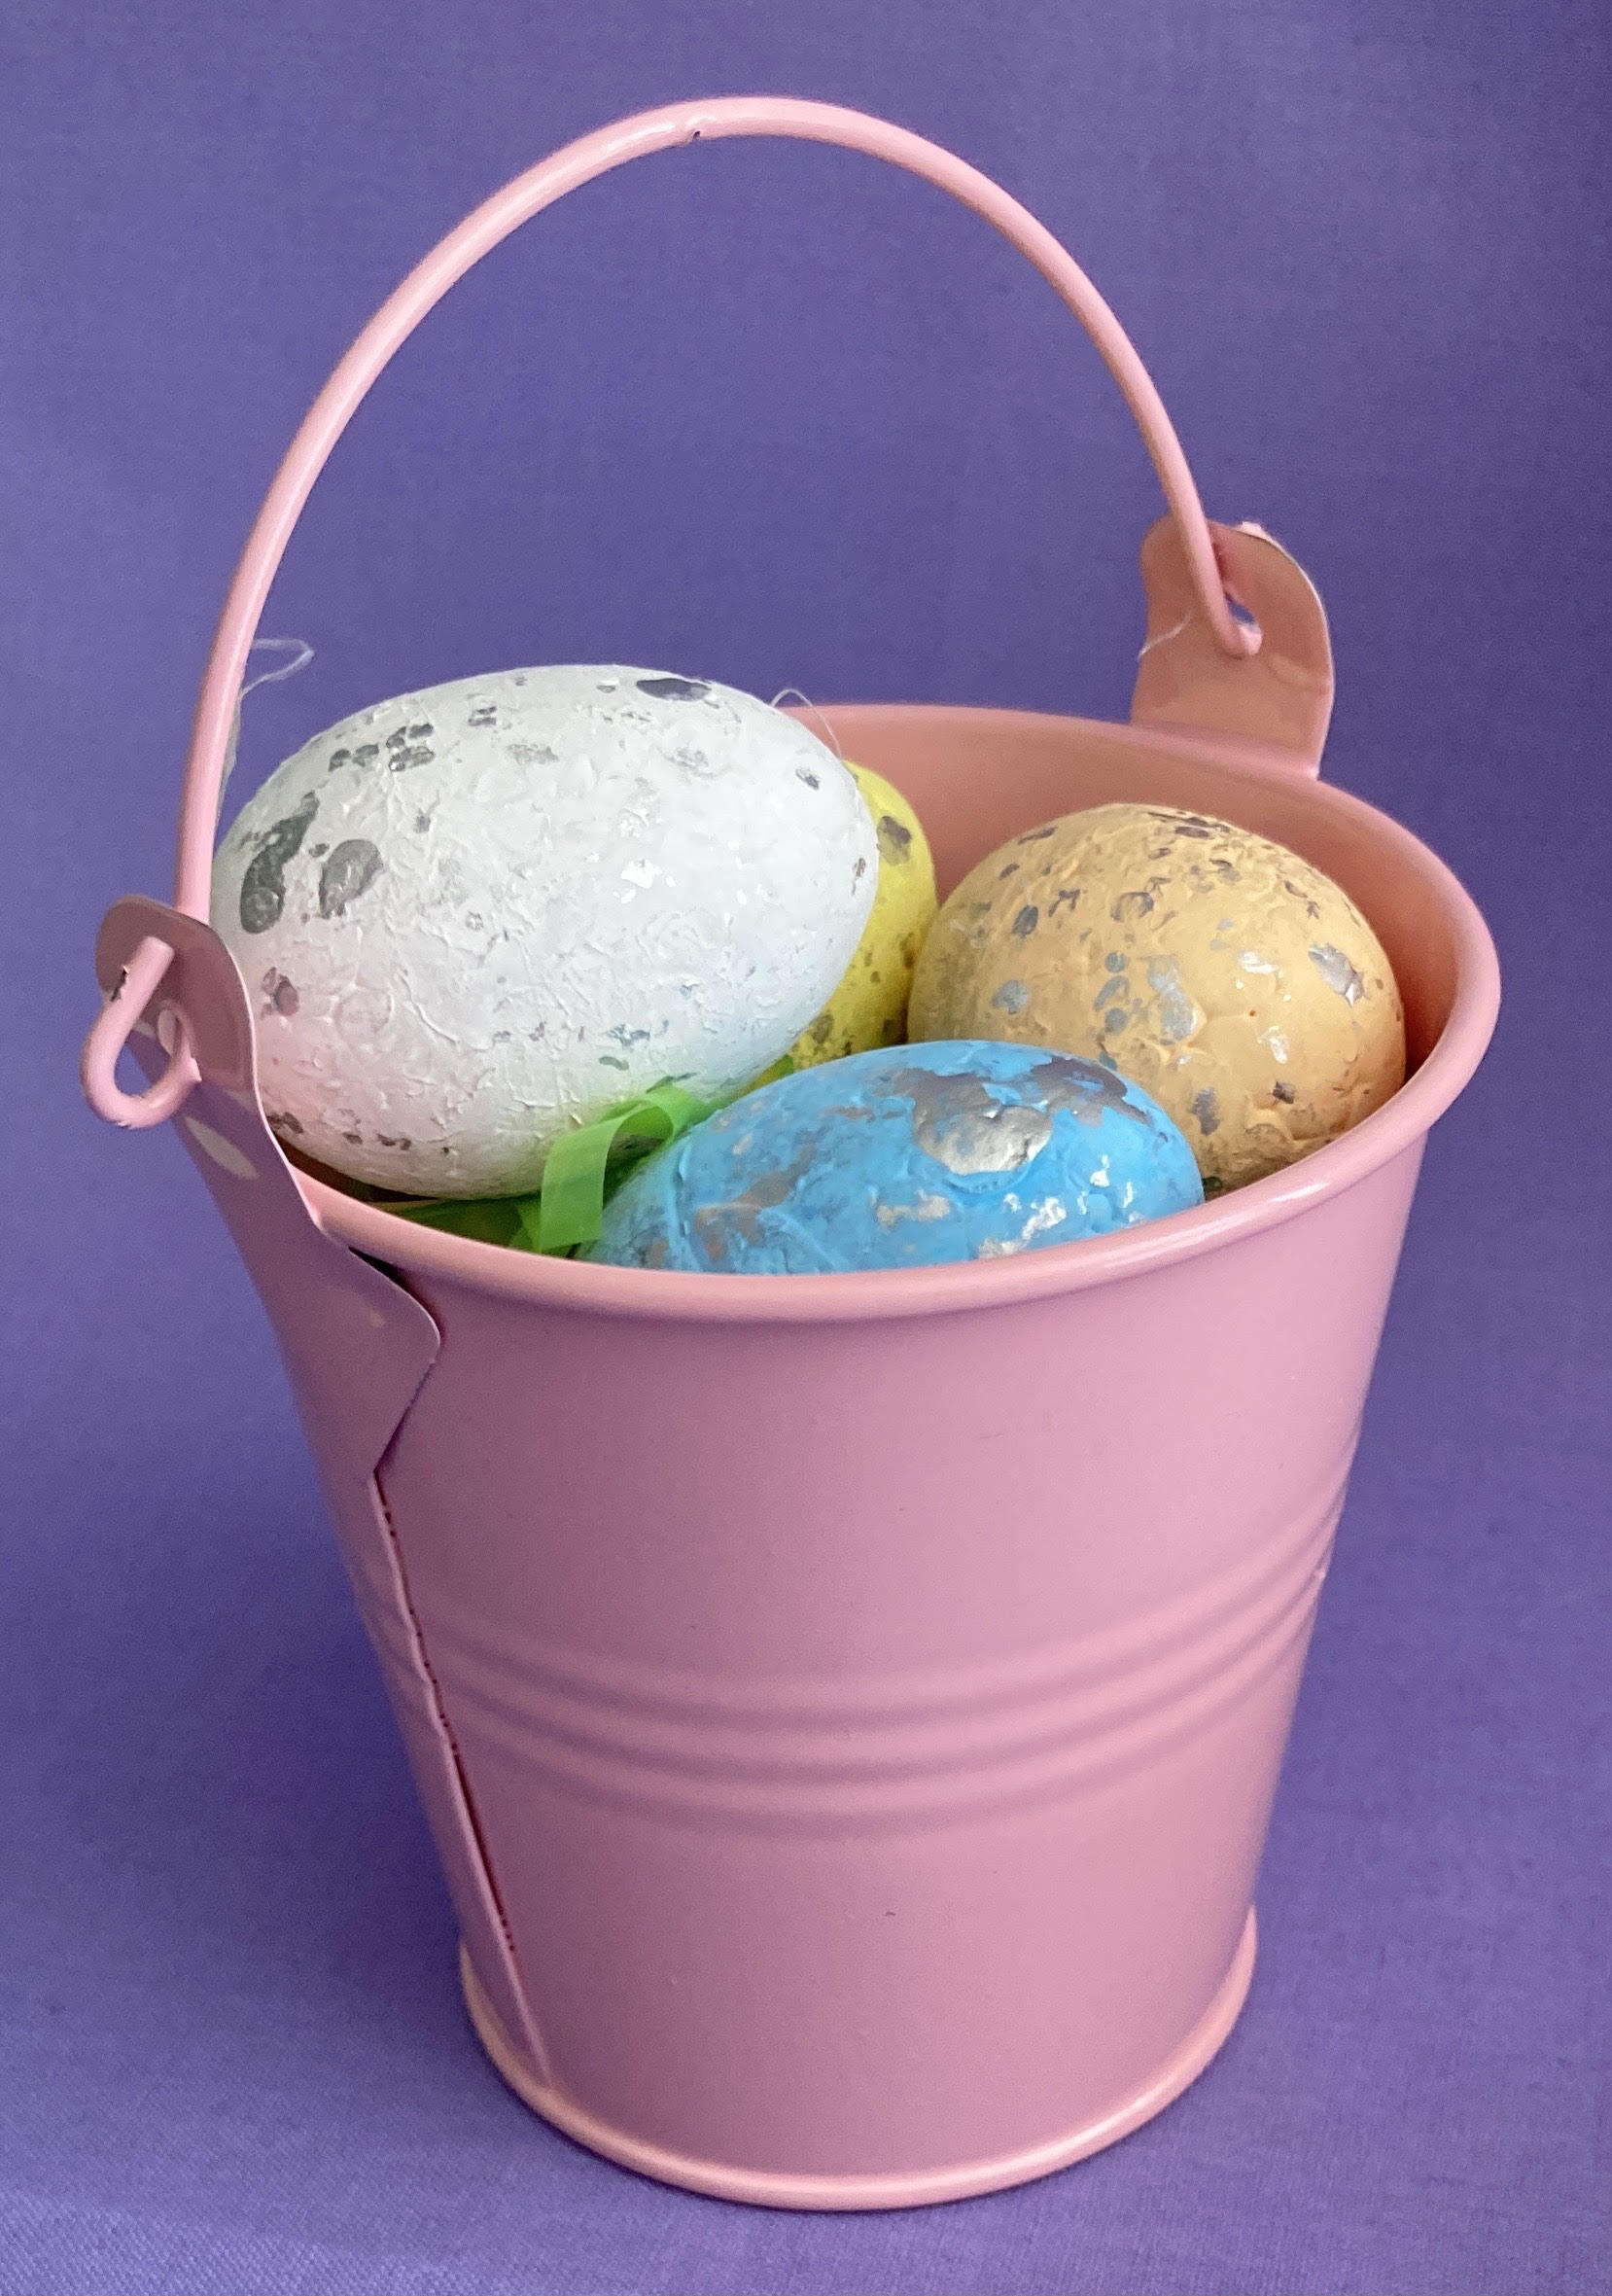 Metal pail with eggs.